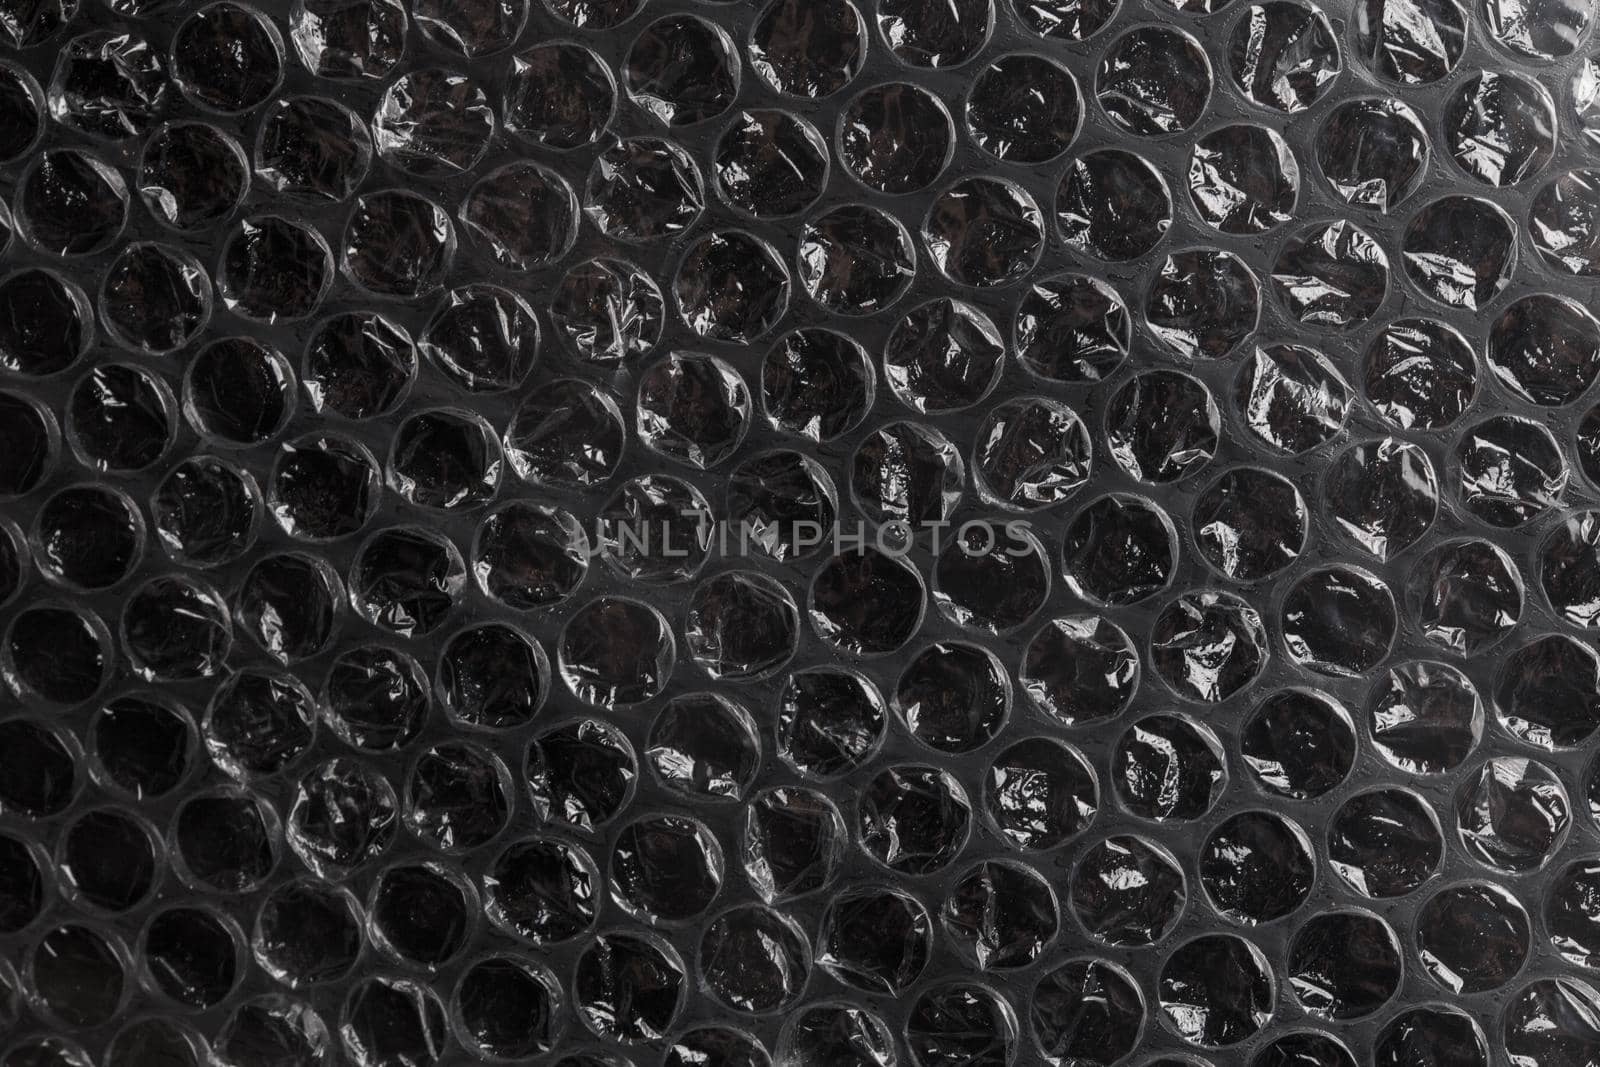 dark air bubble wrap - real life close-up flat texture and background